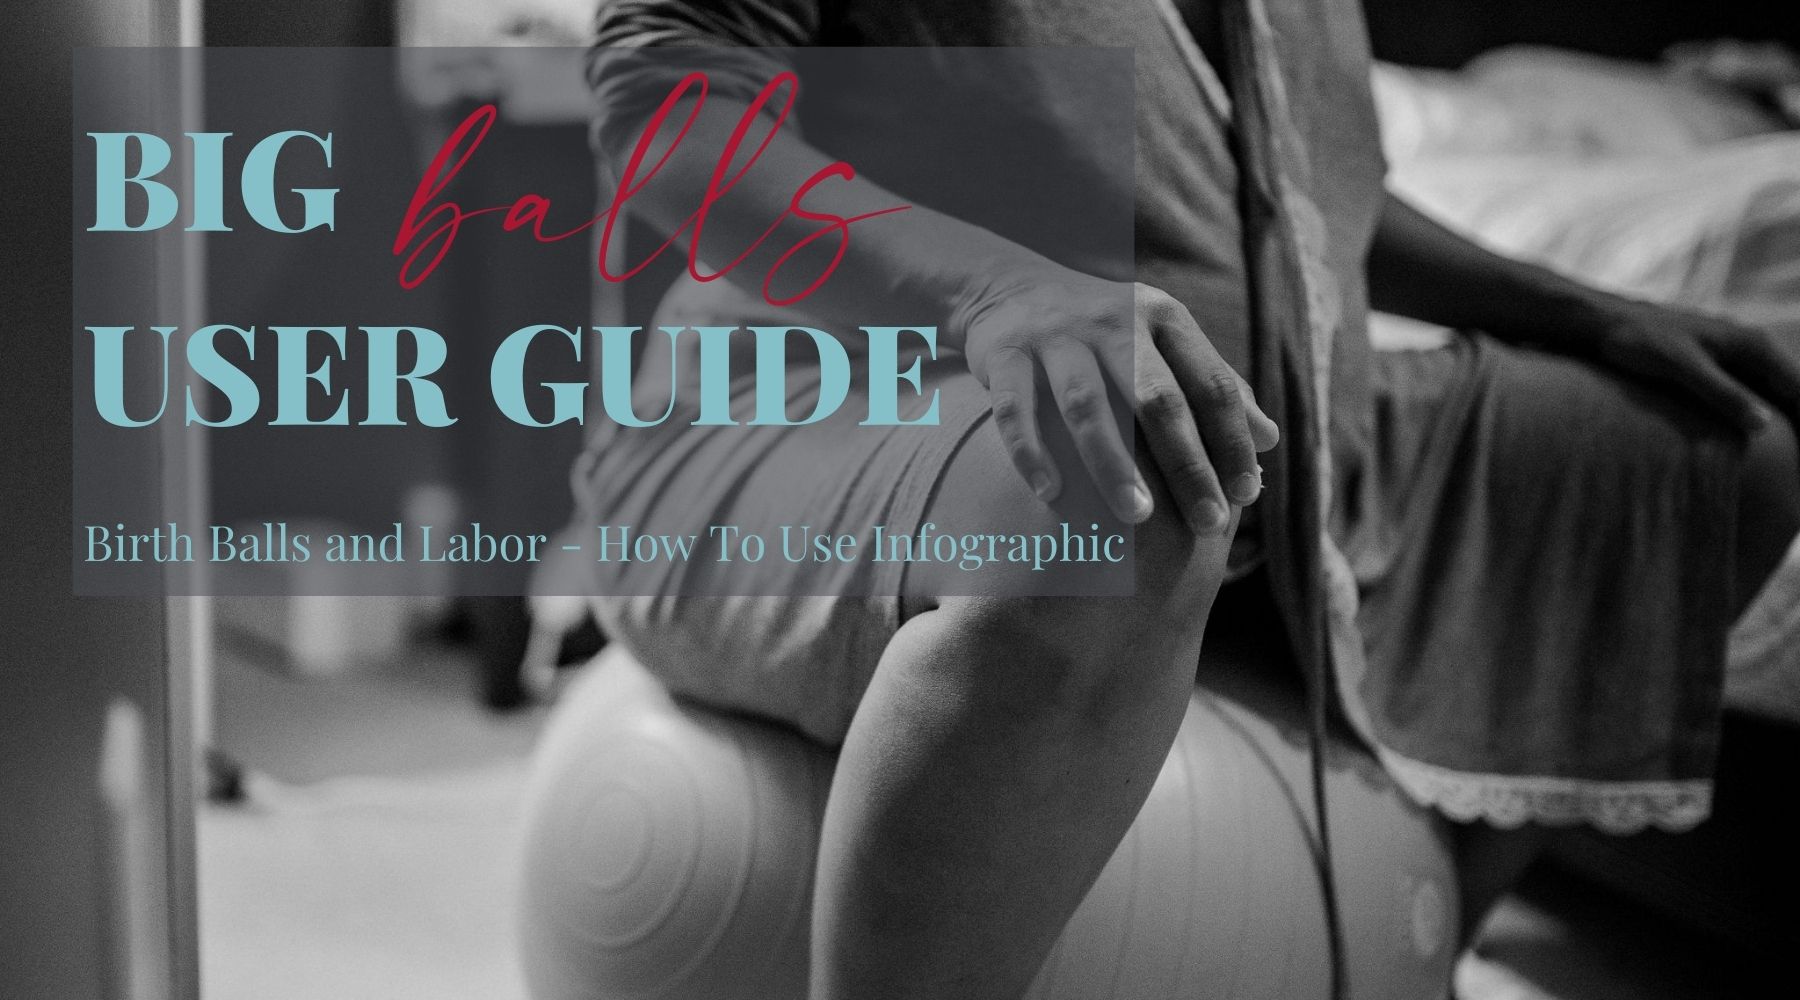 Birth Balls and Labor - How To Use Infographic